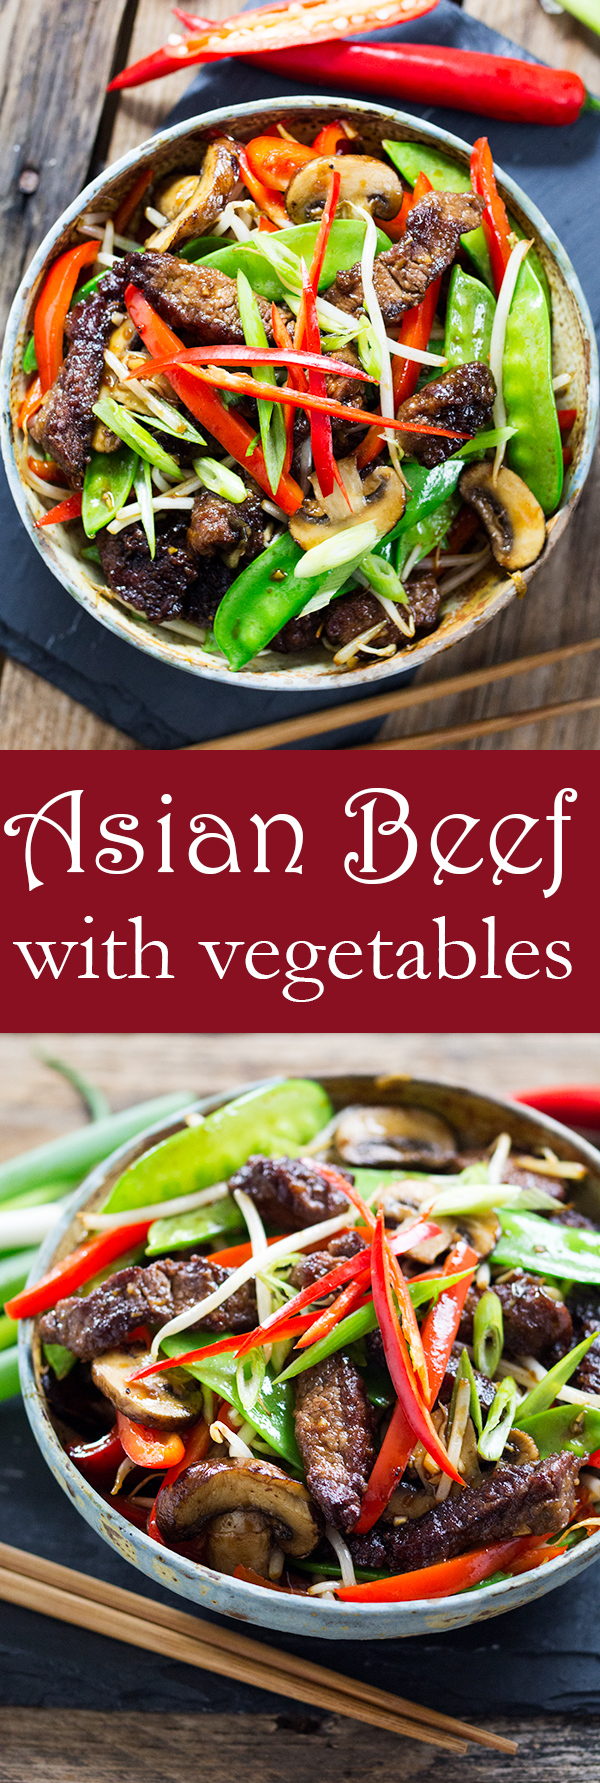 asian beef vegetables pin